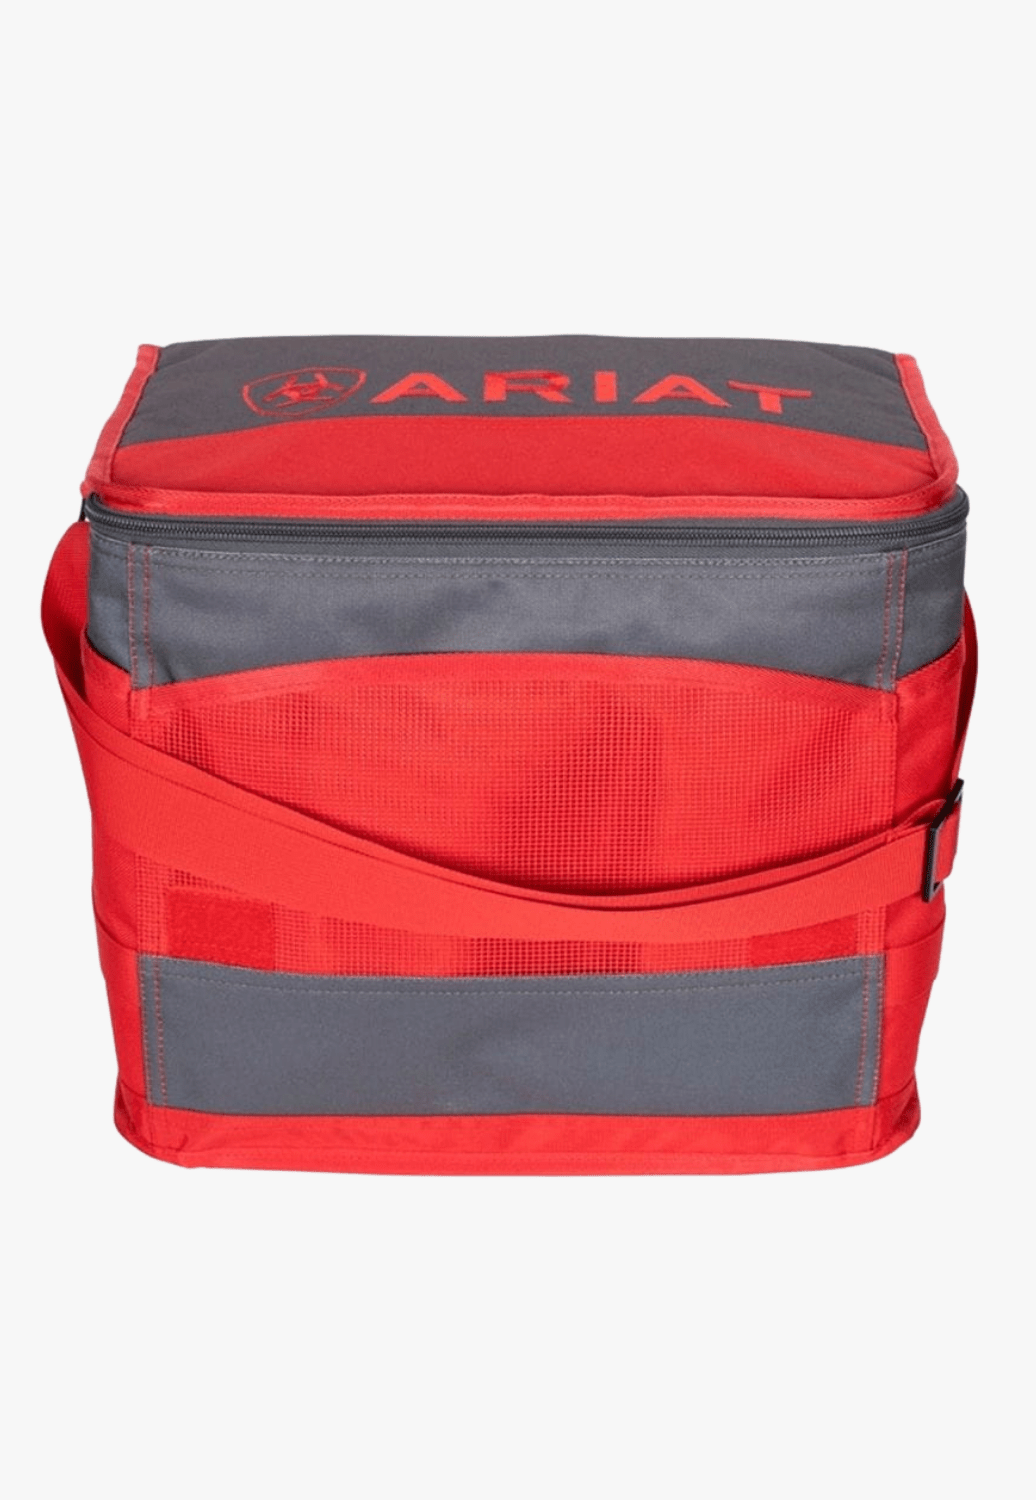 Ariat ACCESSORIES-General Red/Charcoal Ariat Cooler Bag